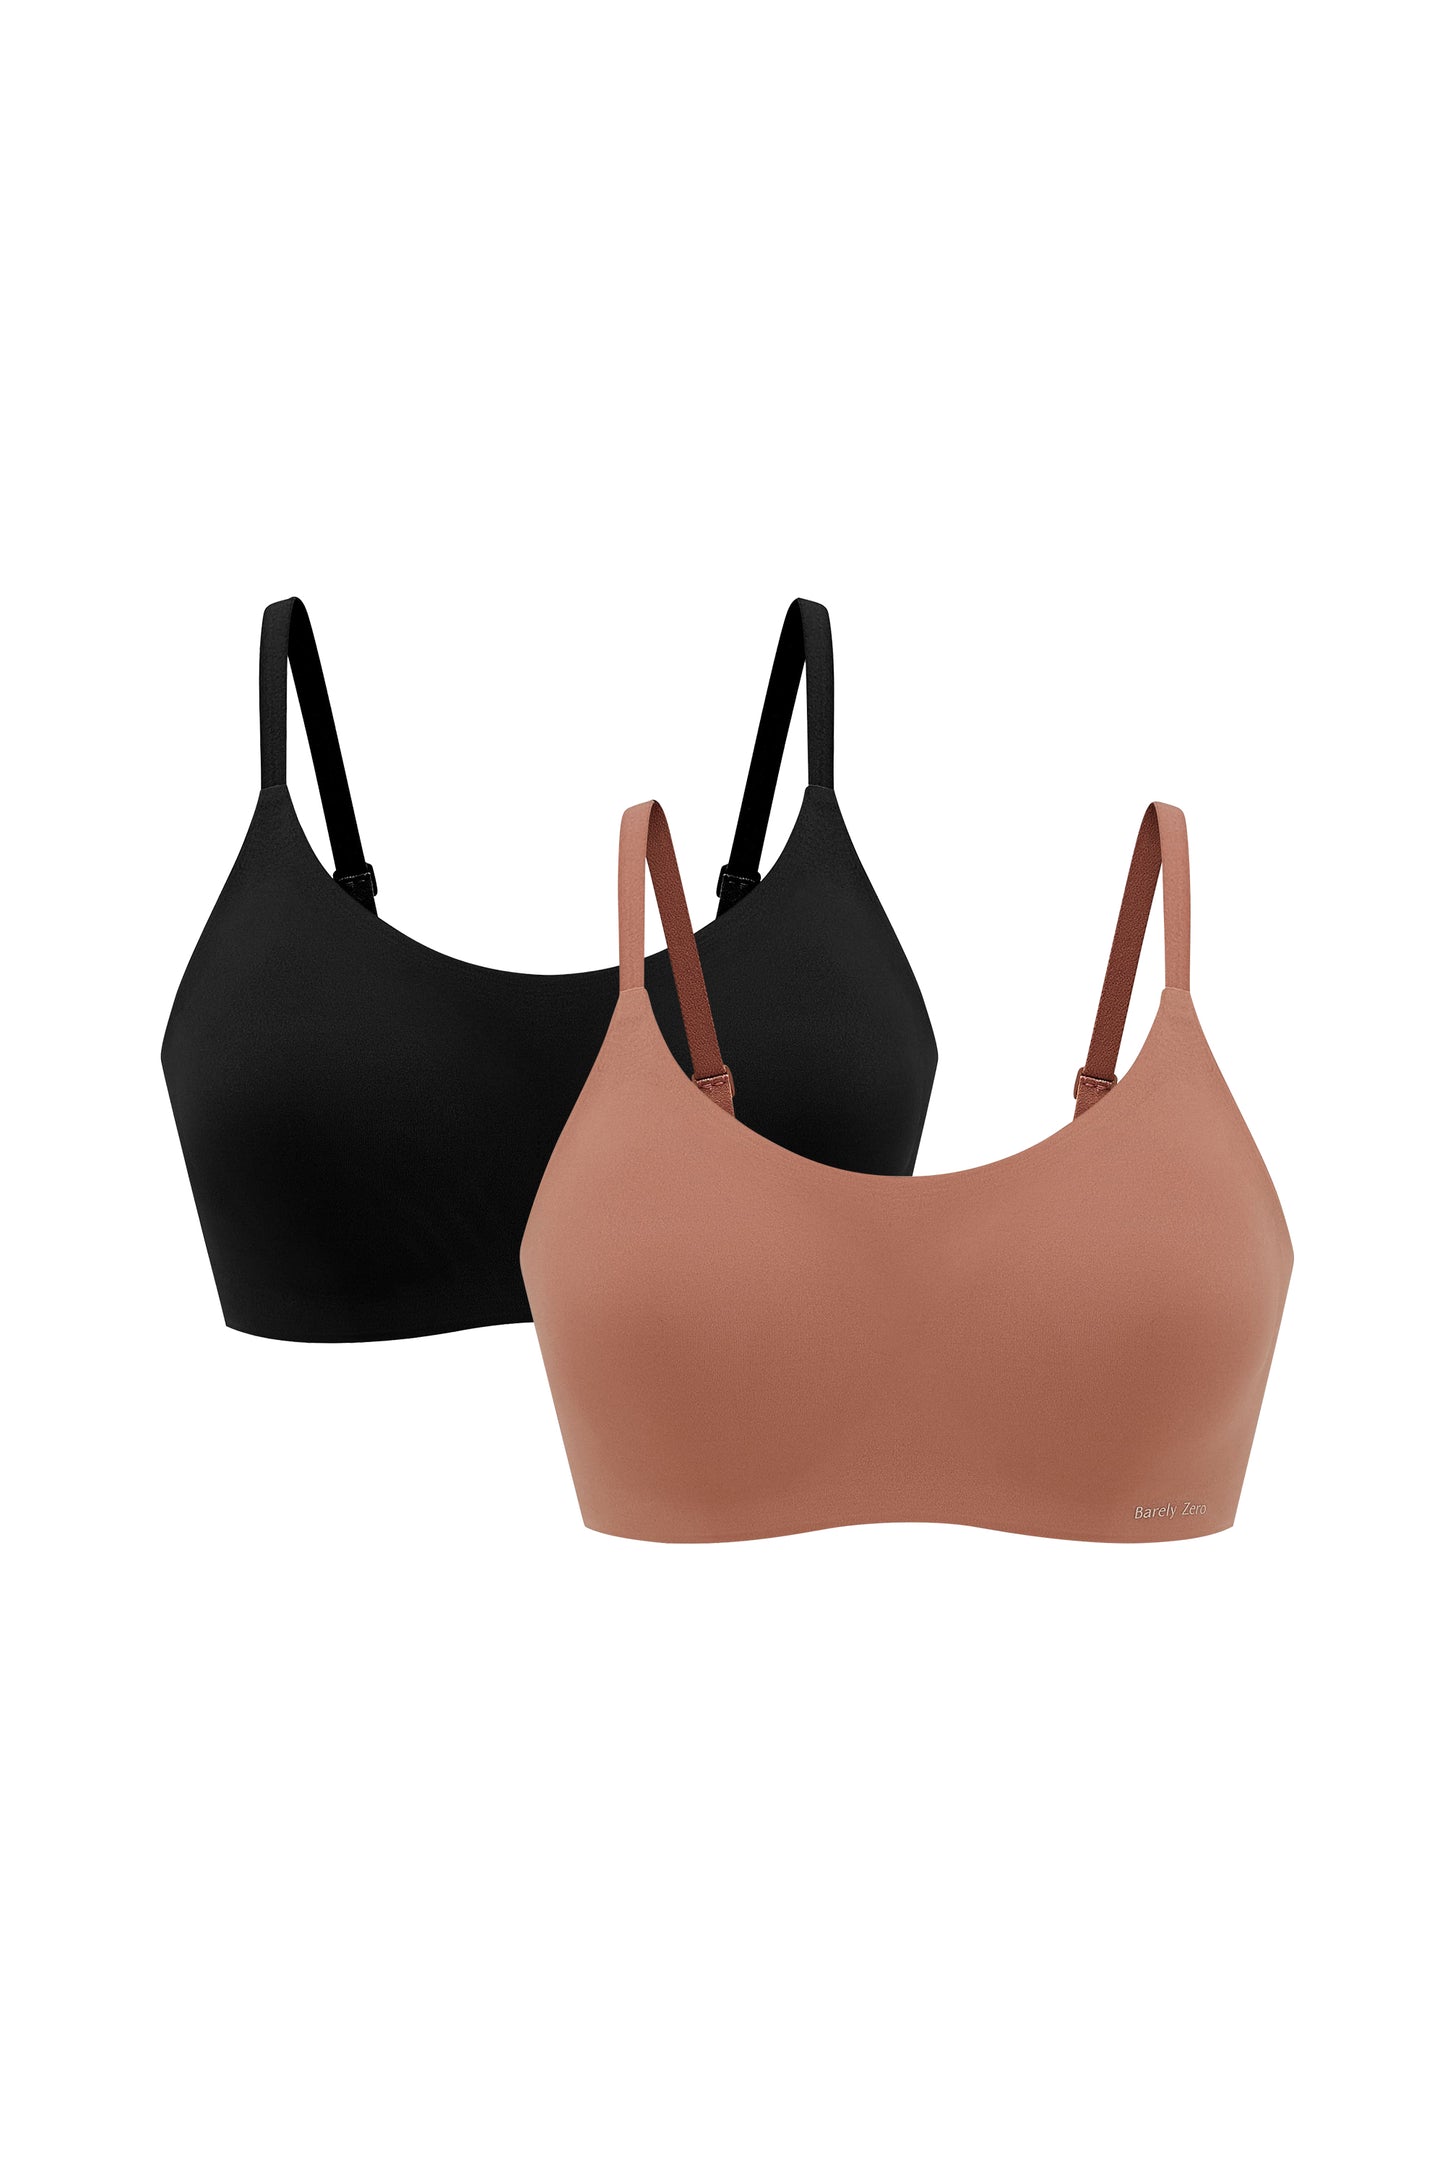 two bras in black and rust color